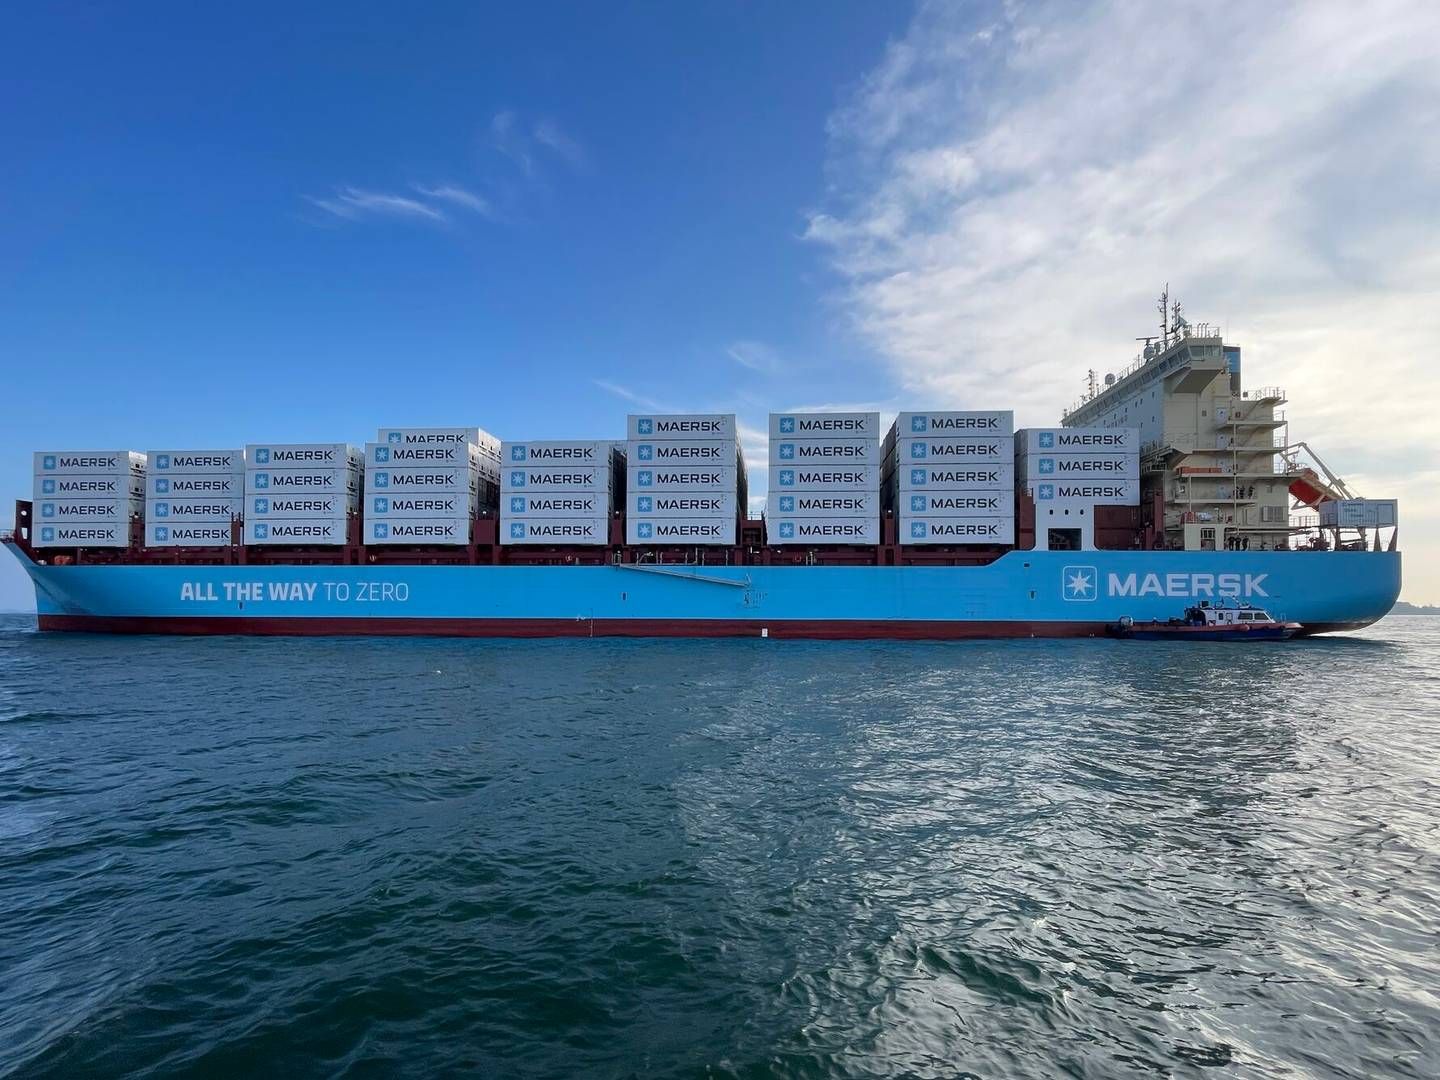 "If you as a shipping company want to make a loan that is in some way linked to a green transition goal […], European banks are significantly further along in structuring loans that are linked to a sustainability goal than, for example, Chinese leasing companies are," says Michael Frisch, CCO of Danish Ship Finance. | Photo: Pr/mærsk